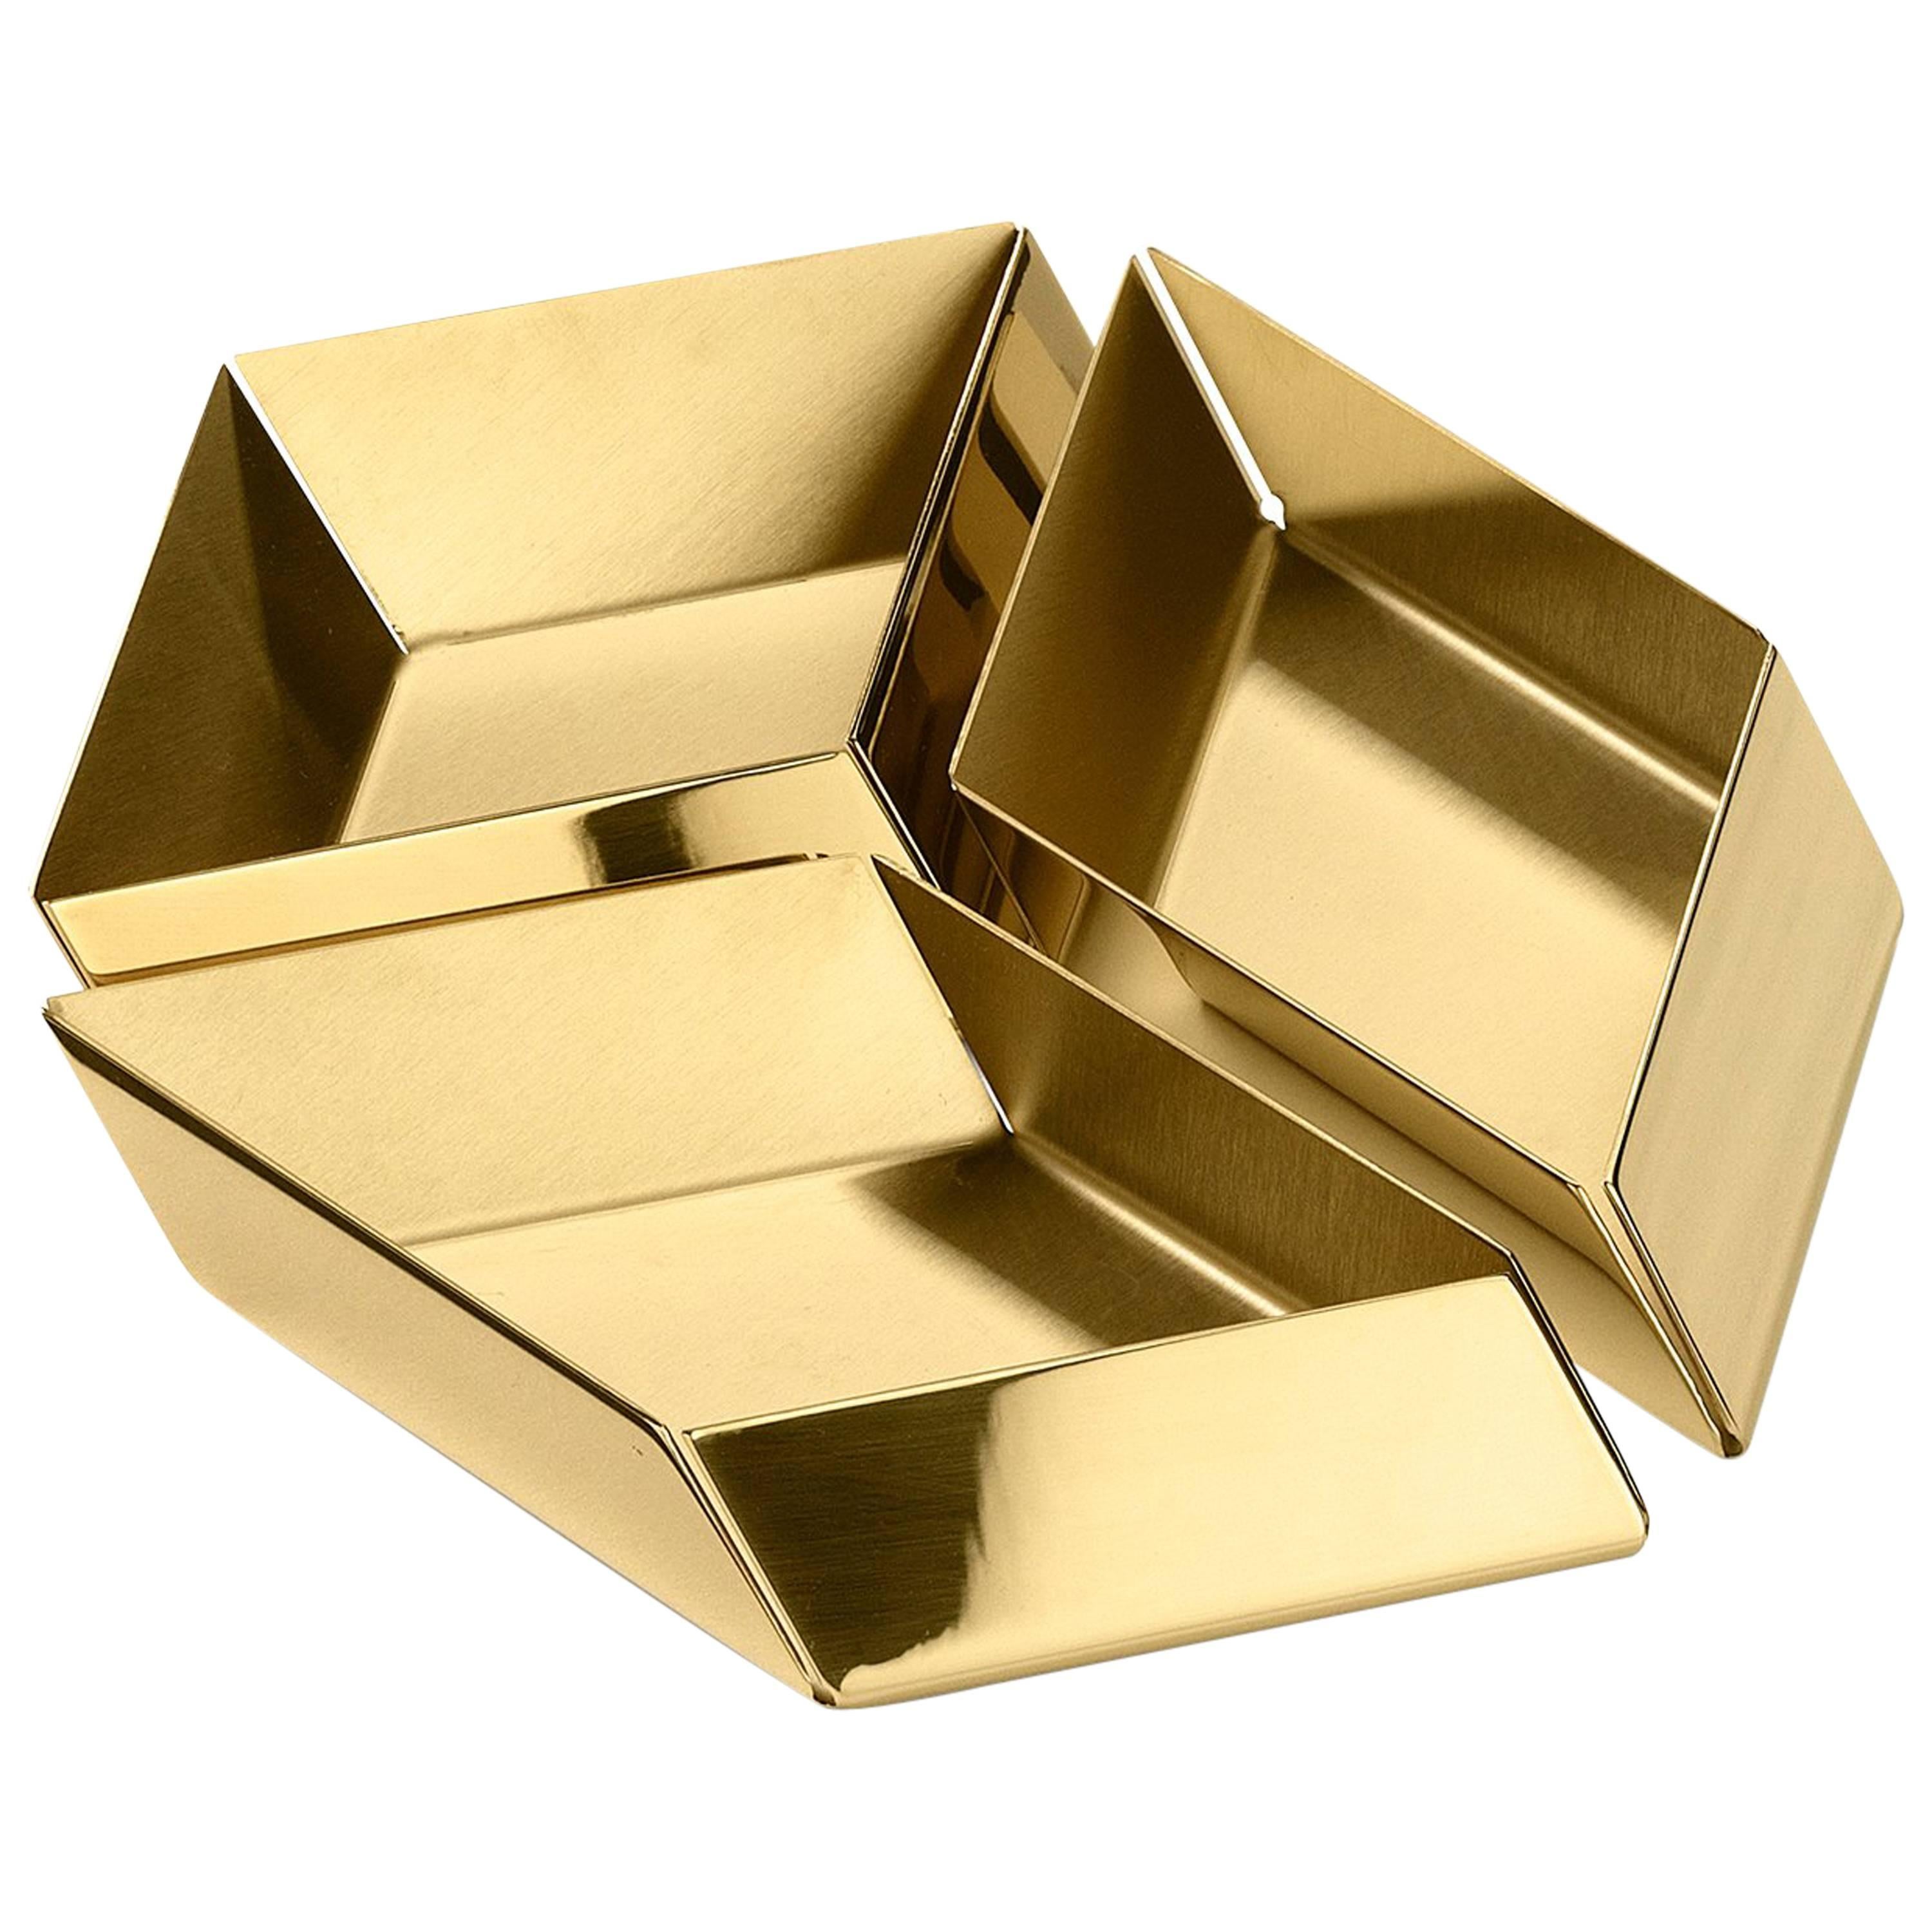 Ghidini 1961 Axonometry Set 1 Small Cube Tray in Polished Brass